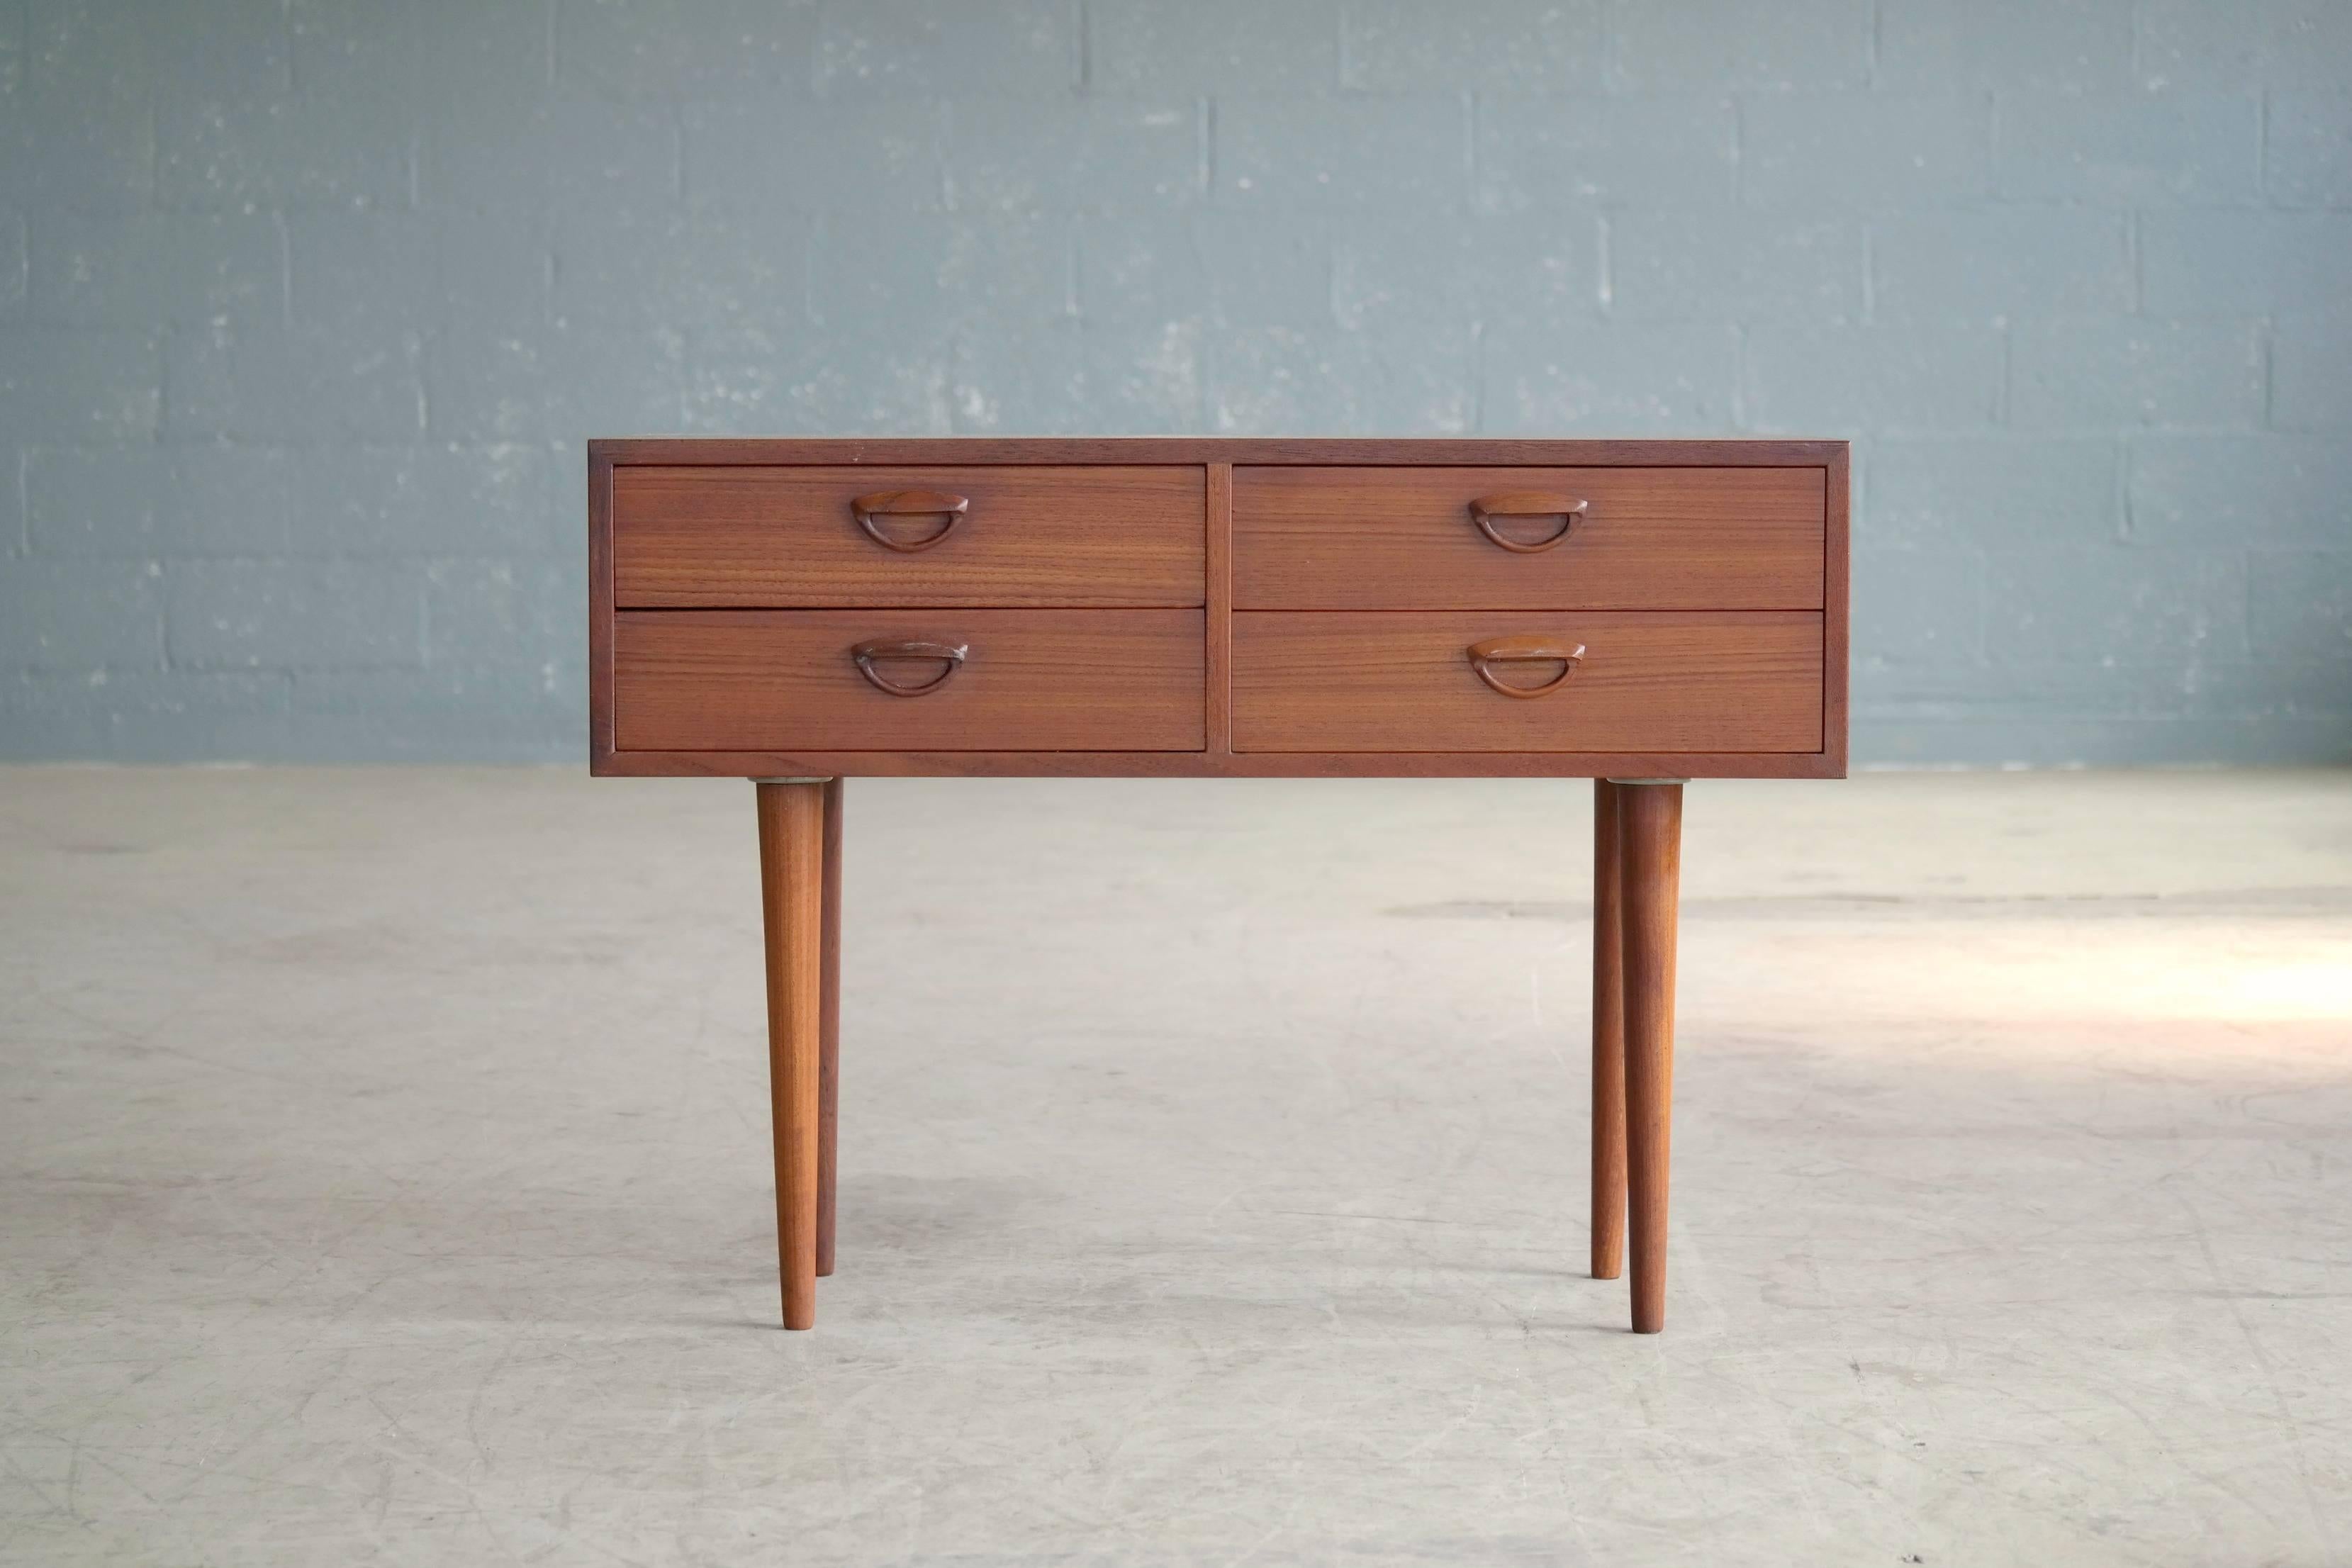 Beautiful chest of drawers or small console in teak from the early 1960s, designed by Kai Kristiansen for Feldballes Mobelfabrik in Denmark. This Danish chest of drawers is made of teak veneer and stands on solid teak conical legs. The drawer pulls